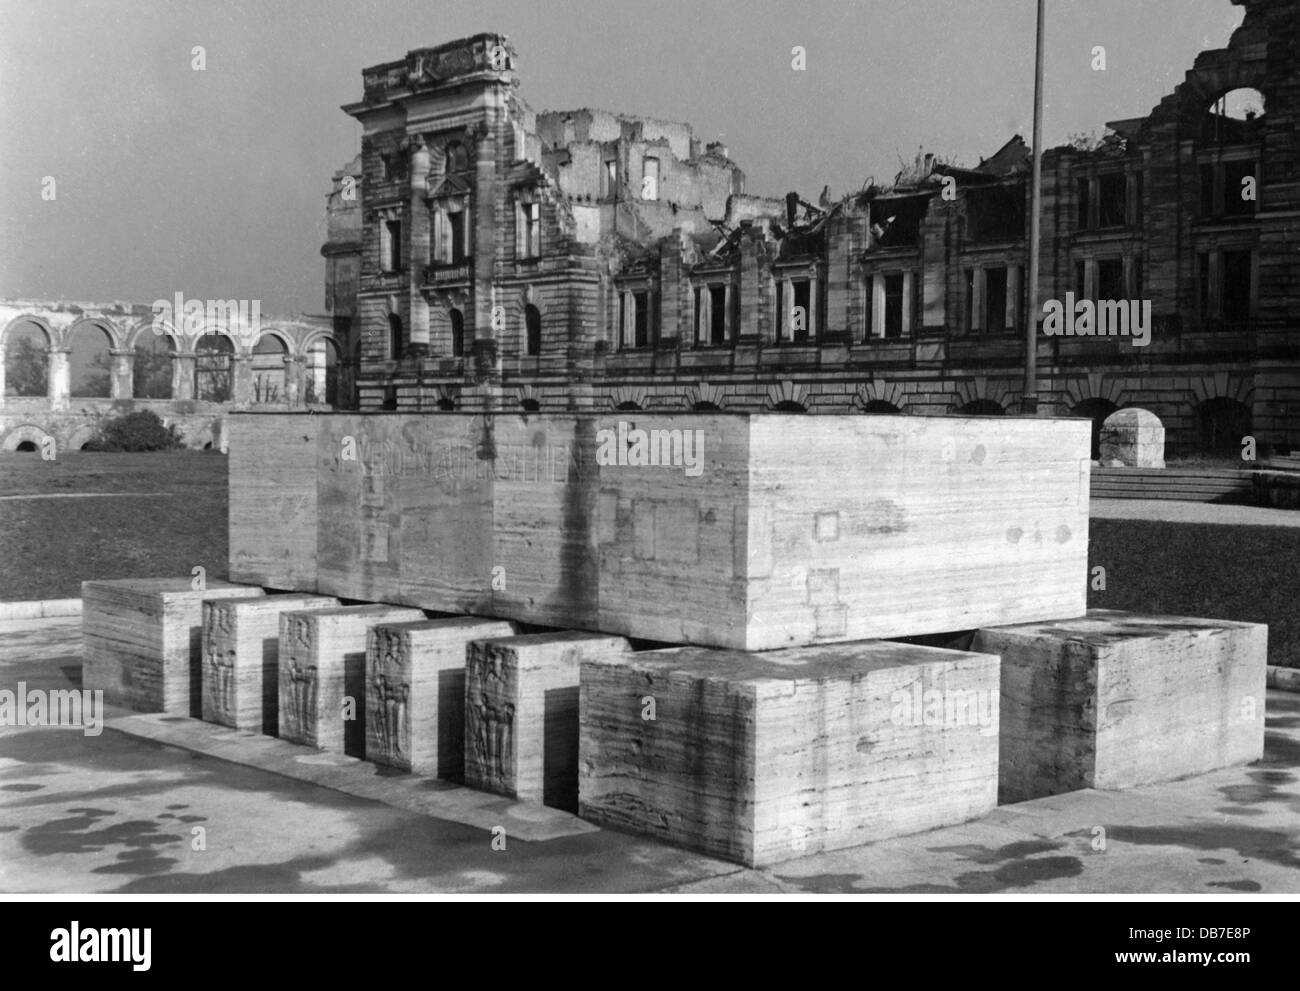 post war period, destroyed cities, Germany, Munich, Armeemuseum (Museum of Military History), November 1952, Additional-Rights-Clearences-Not Available Stock Photo